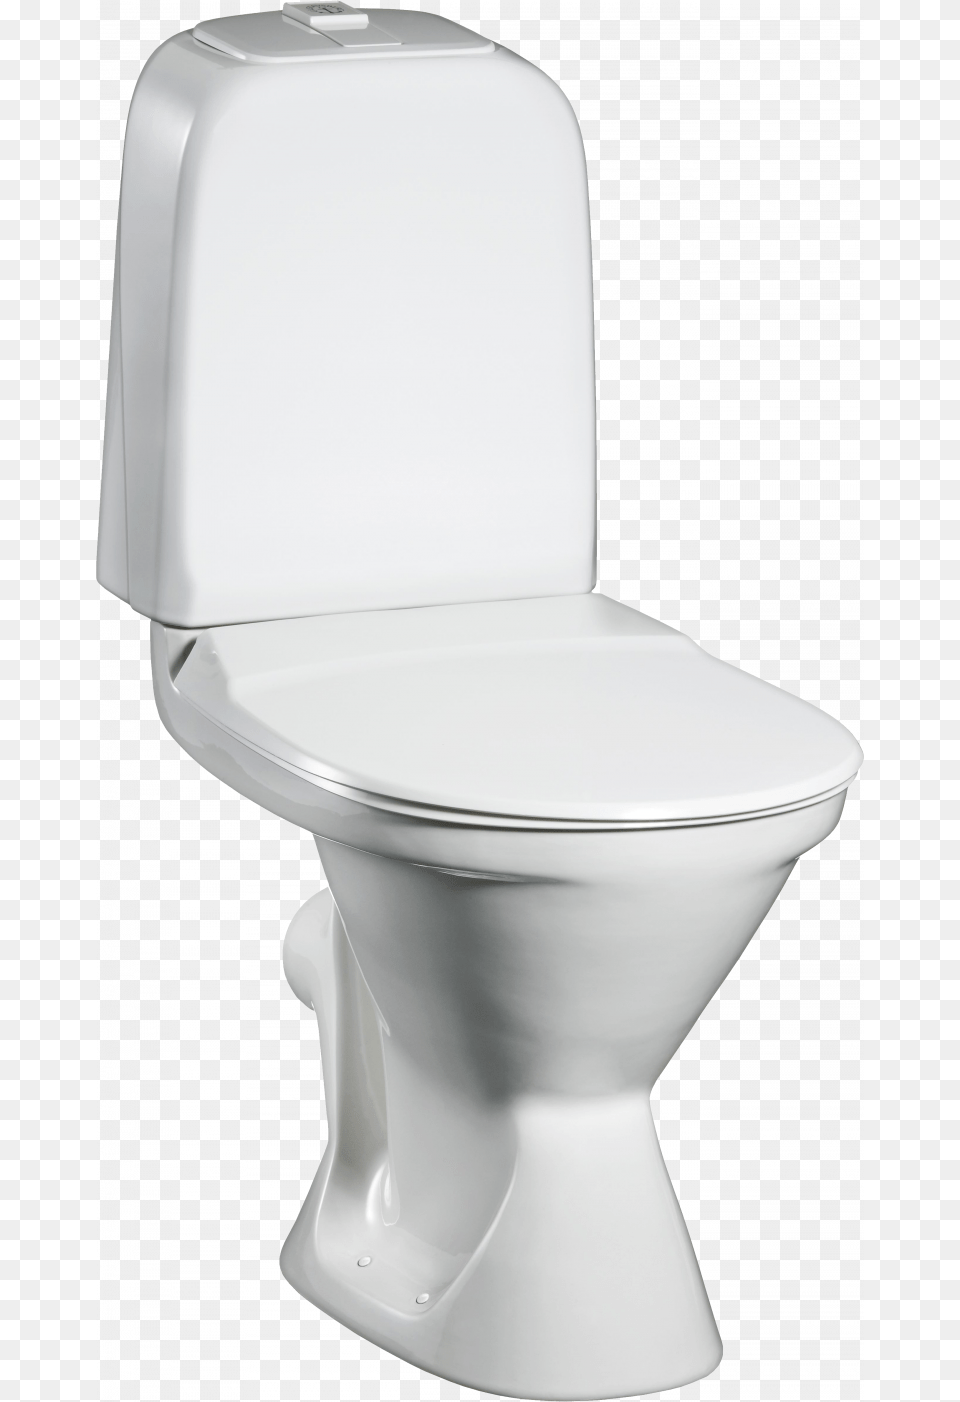 Now You Can Toilet Without Background Chair, Indoors, Bathroom, Room, Potty Png Image